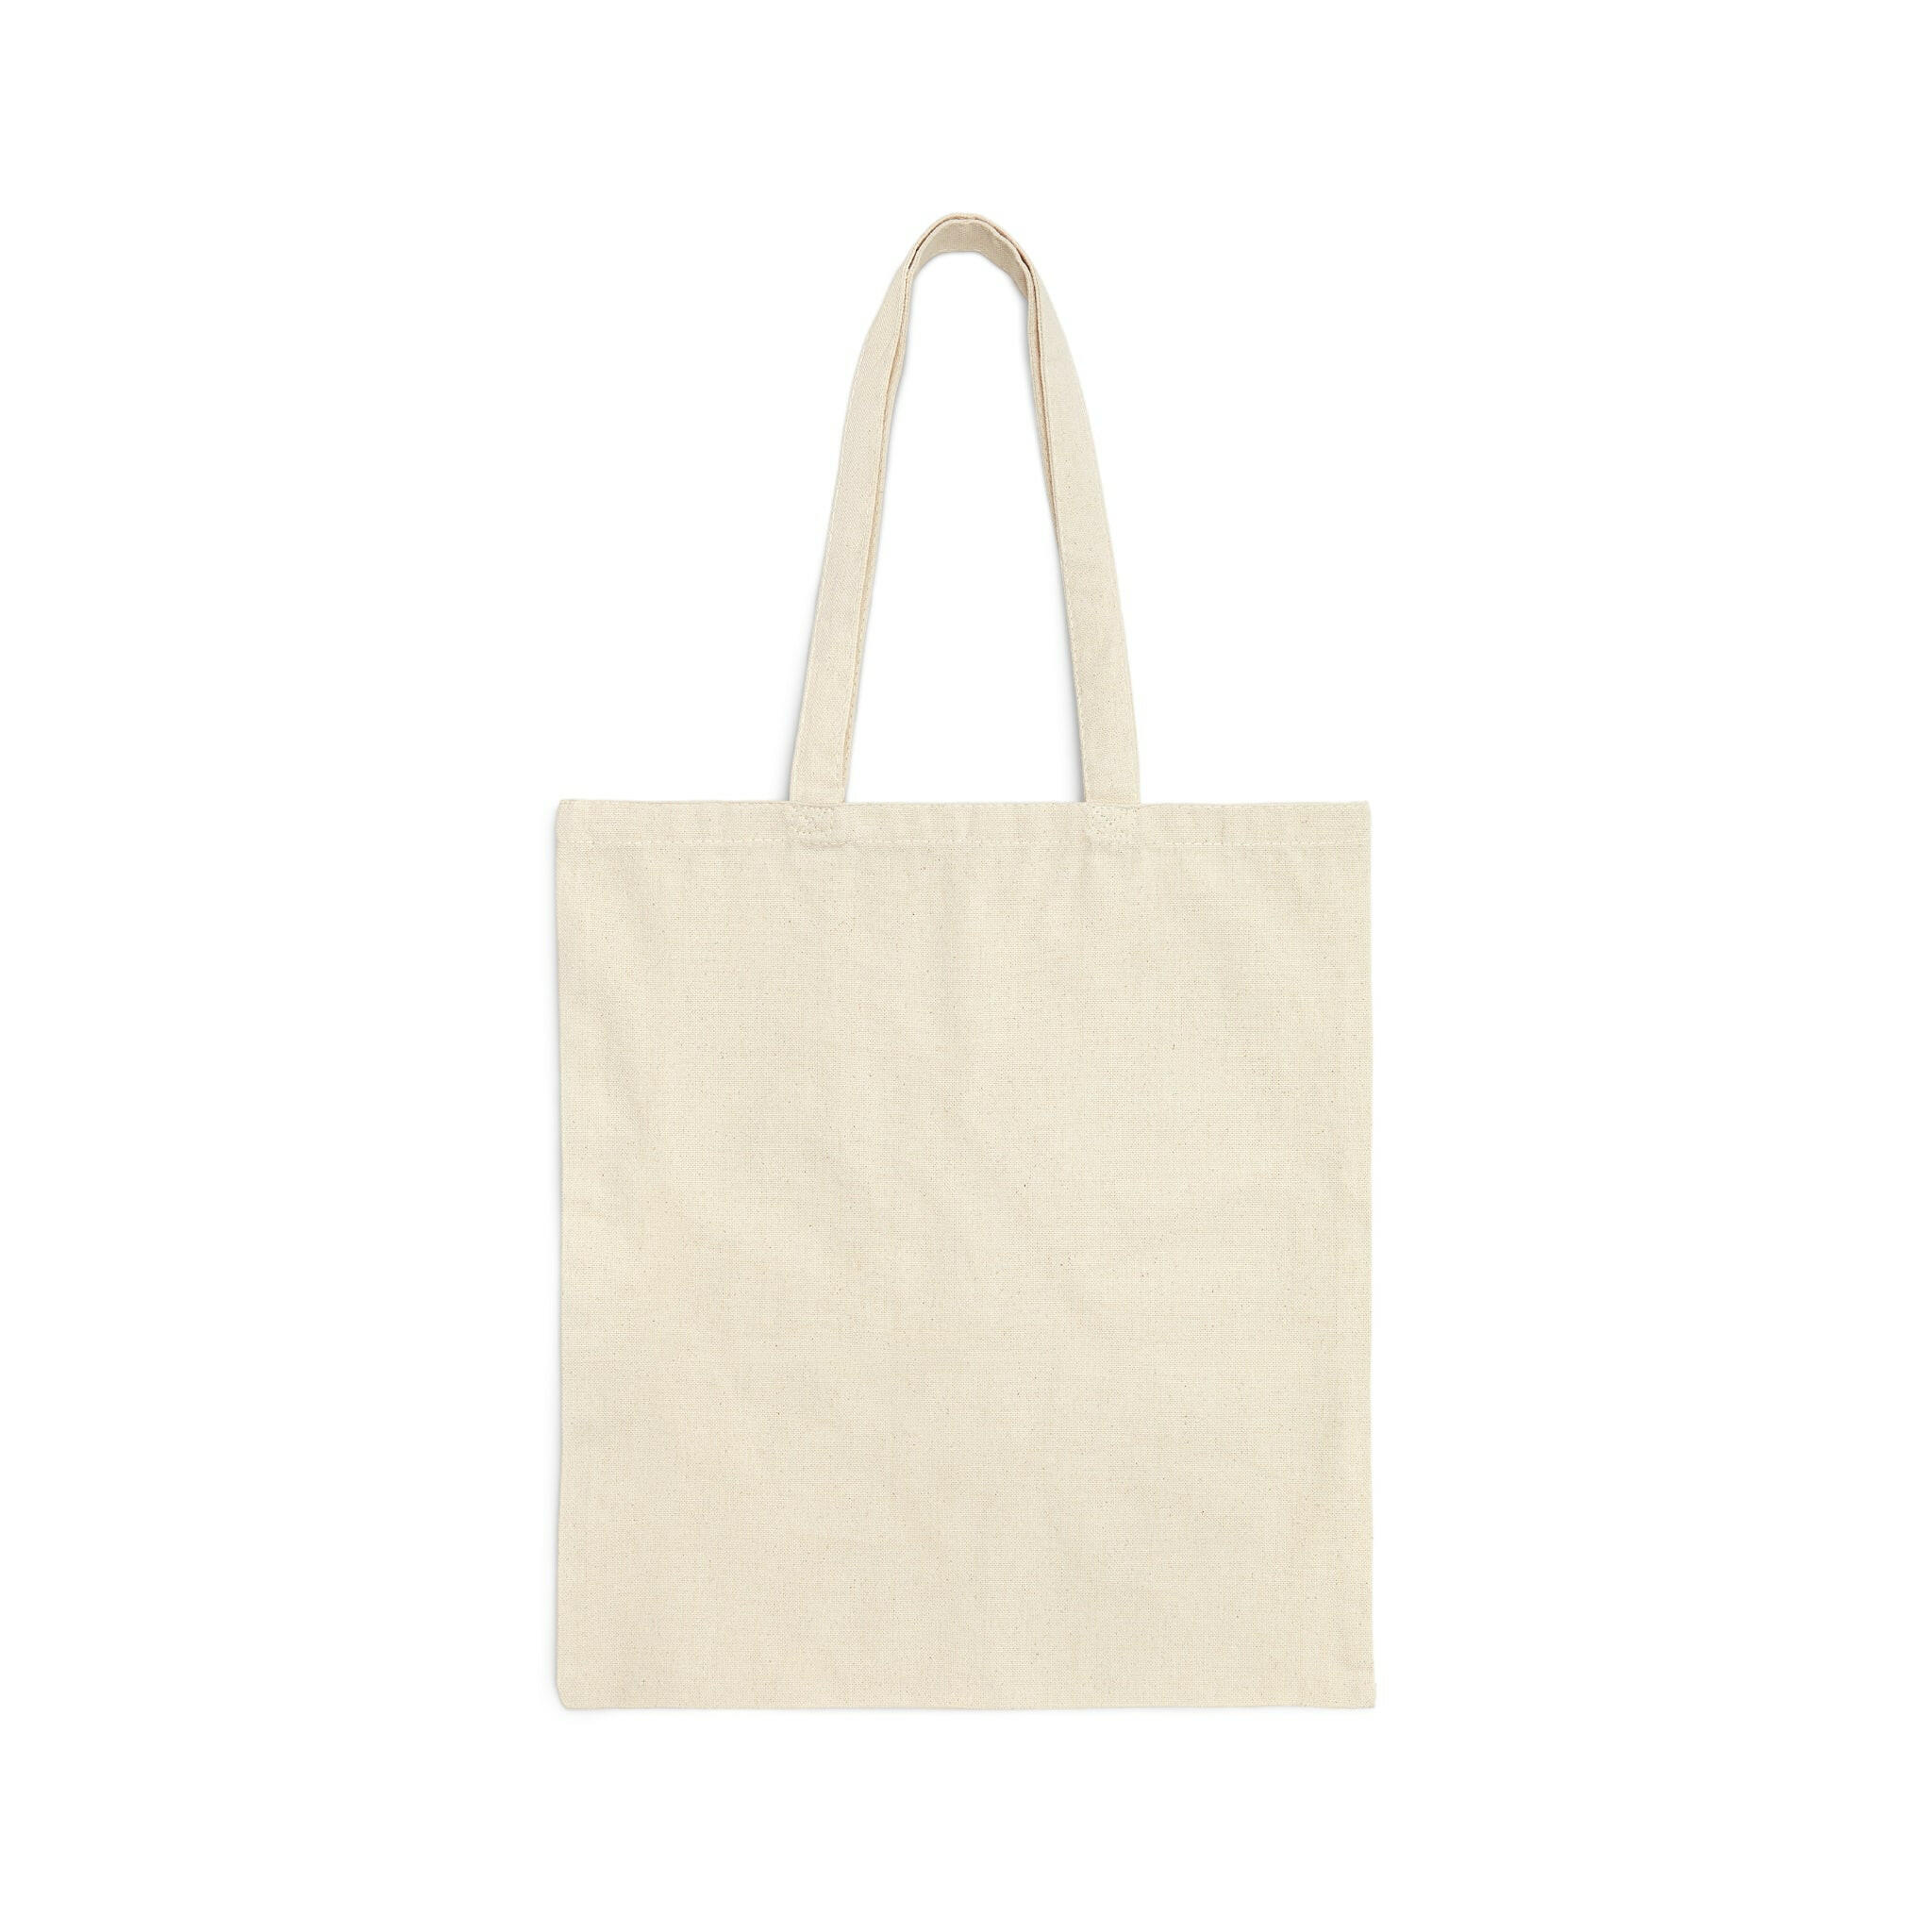 God Bless America Cotton Canvas Tote Bag.